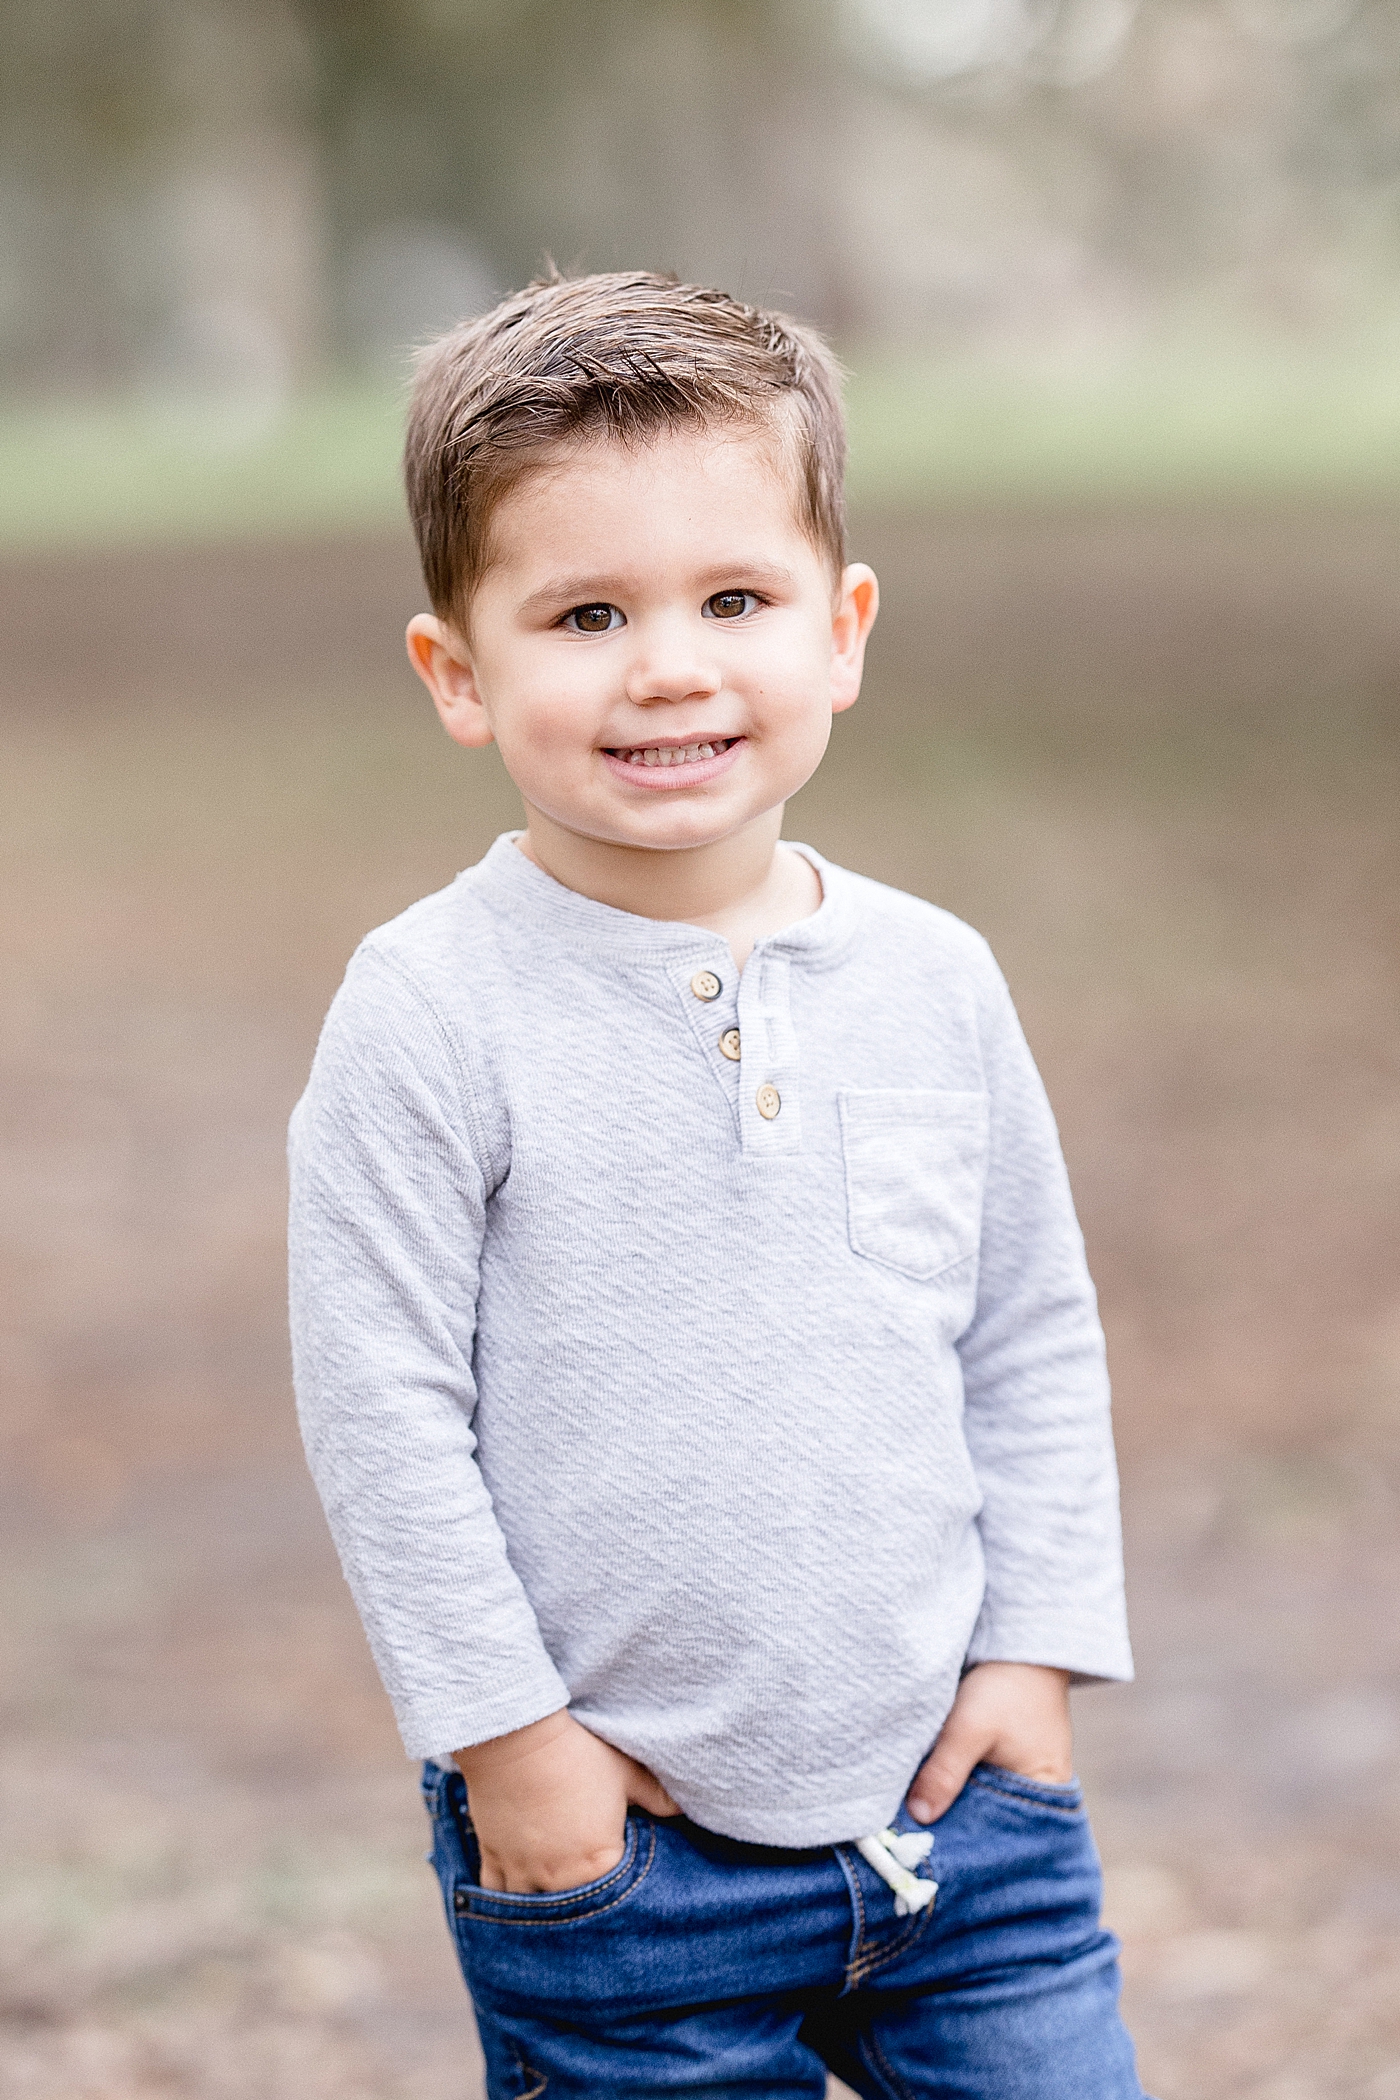 Toddler boy standing for portrait with Brittany Elise Photography.